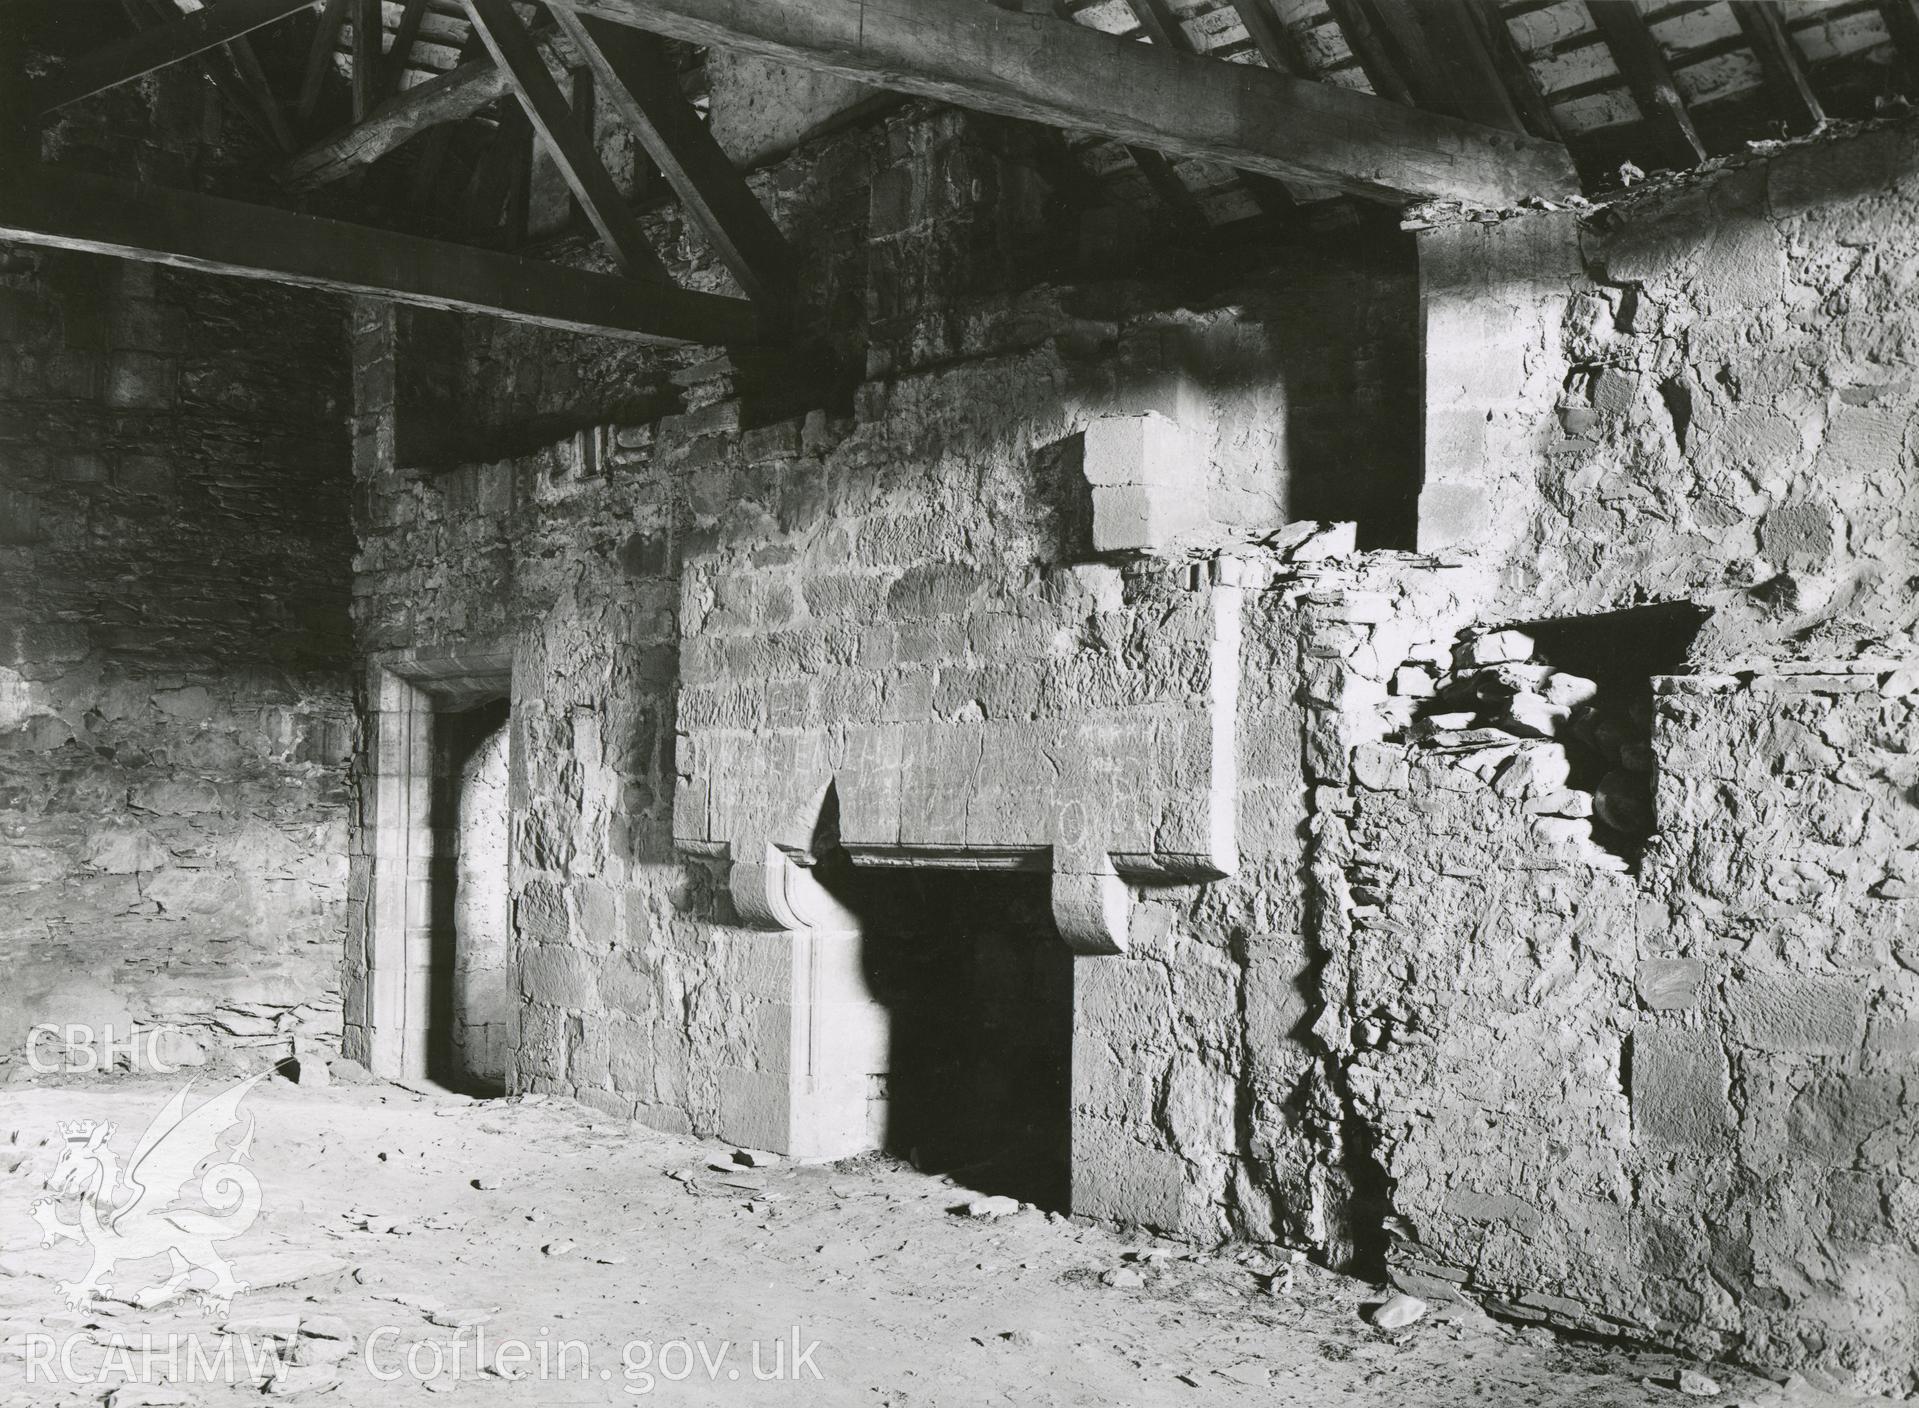 Digitised copy of a black and white photograph showing dormitory fireplace at Valle Crucis Abbey, taken by F.H. Crossley, 1949. Copied from print as negative held by NMR England (Historic England).